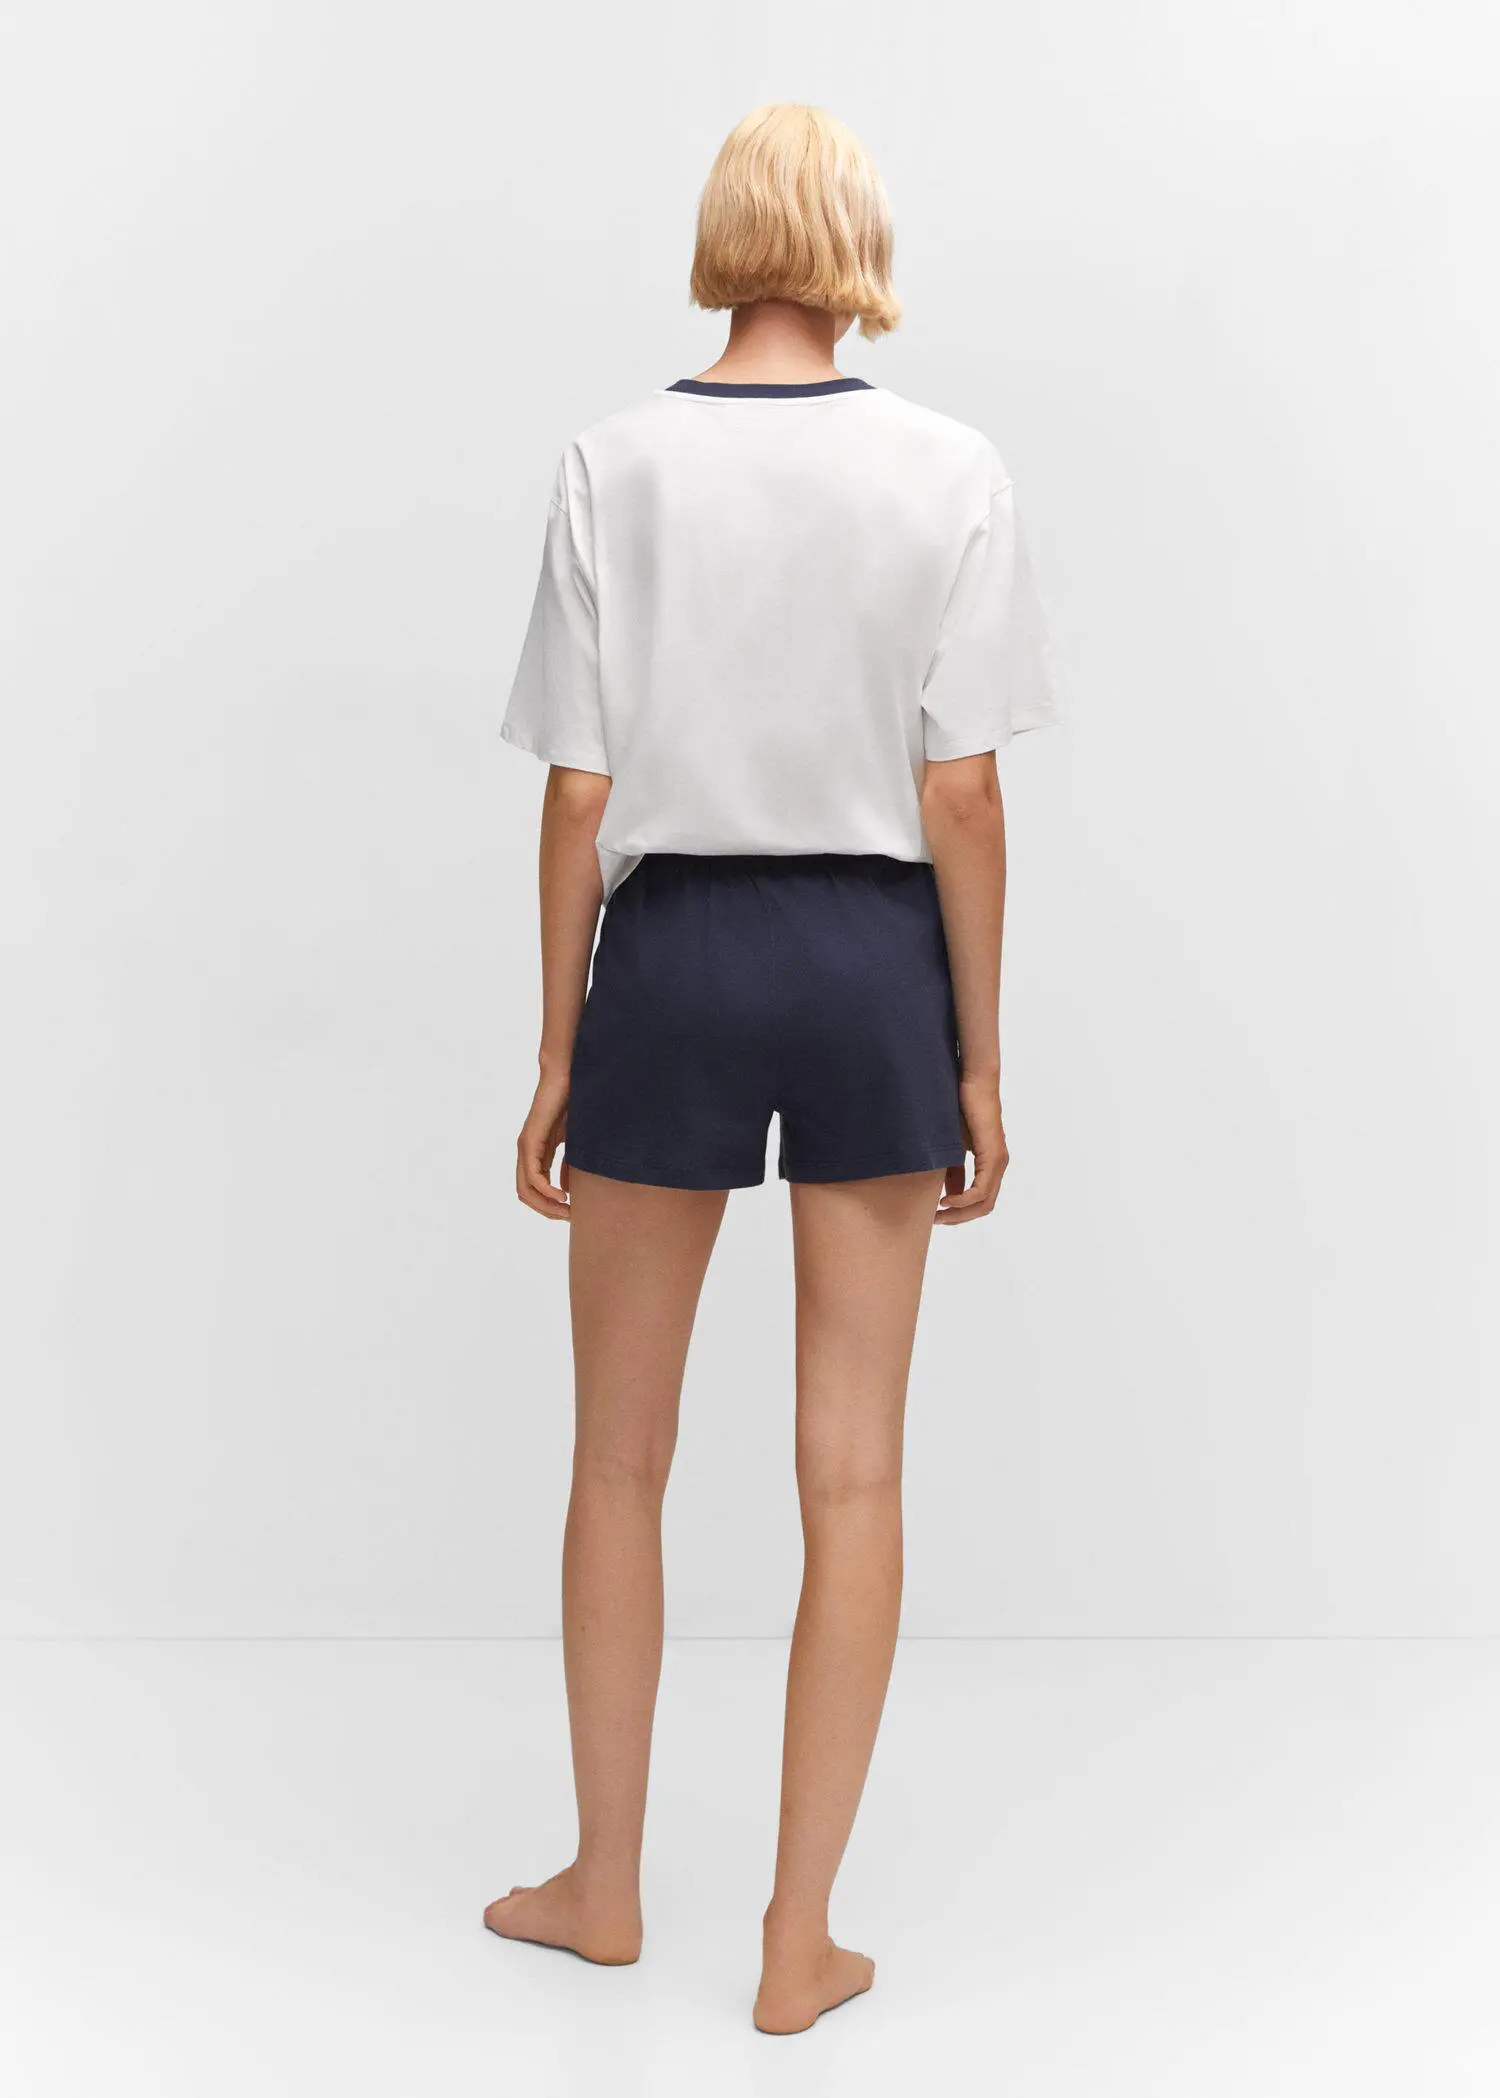 Mango Cotton shorts with elastic waist. a person wearing a white shirt and black shorts. 